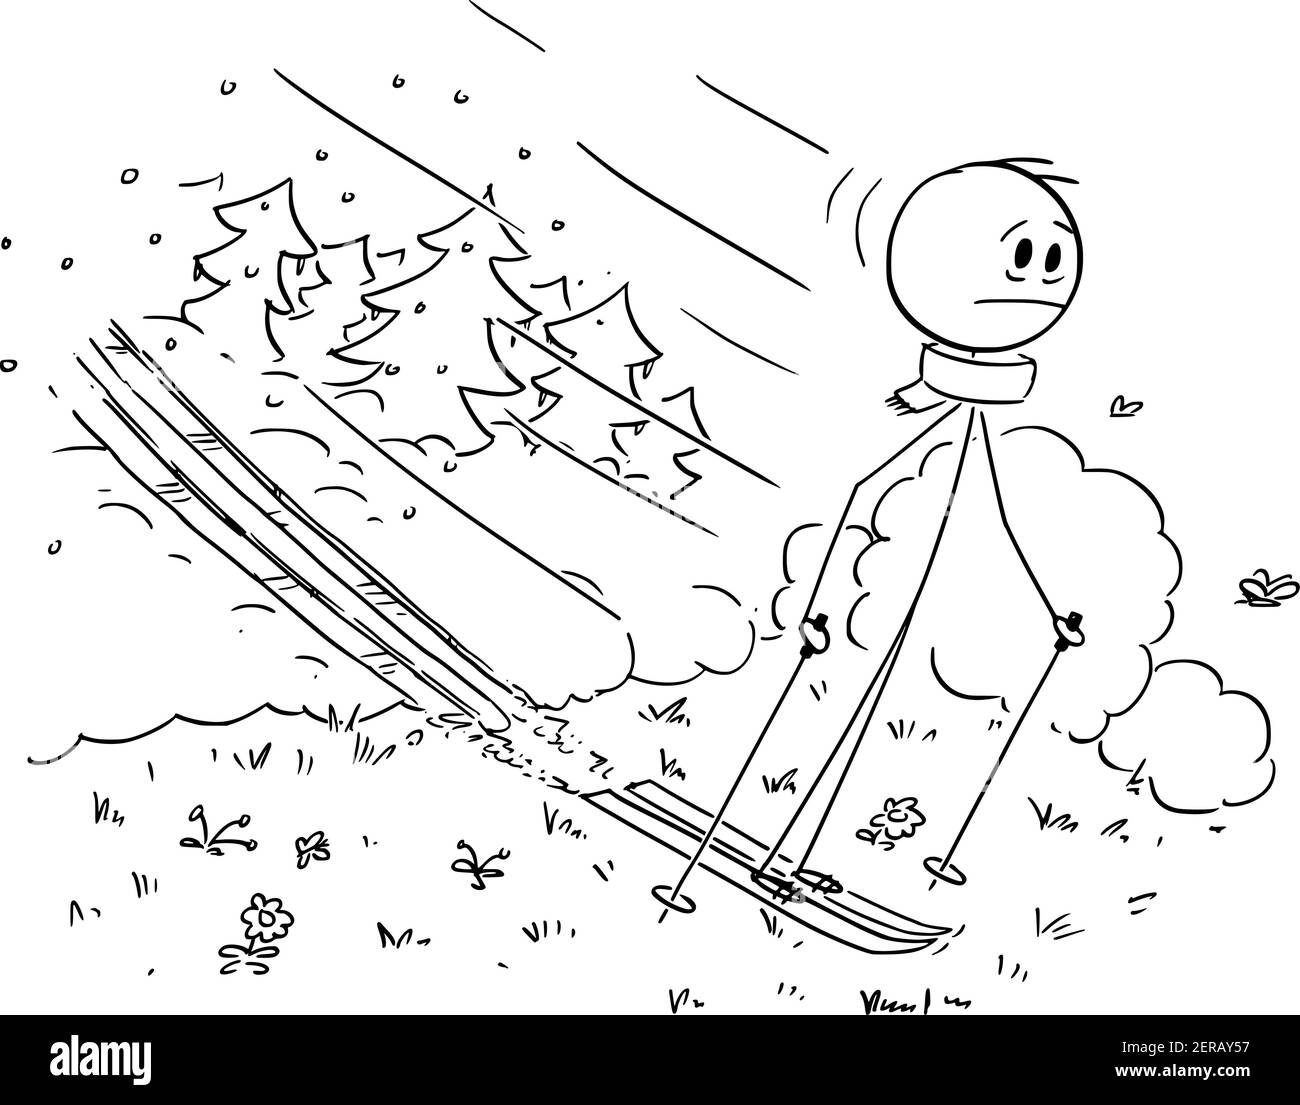 Man skiing on snow, while winter ended and spring begins, man skying on grass. Vector cartoon stick figure or character illustration. Stock Vector